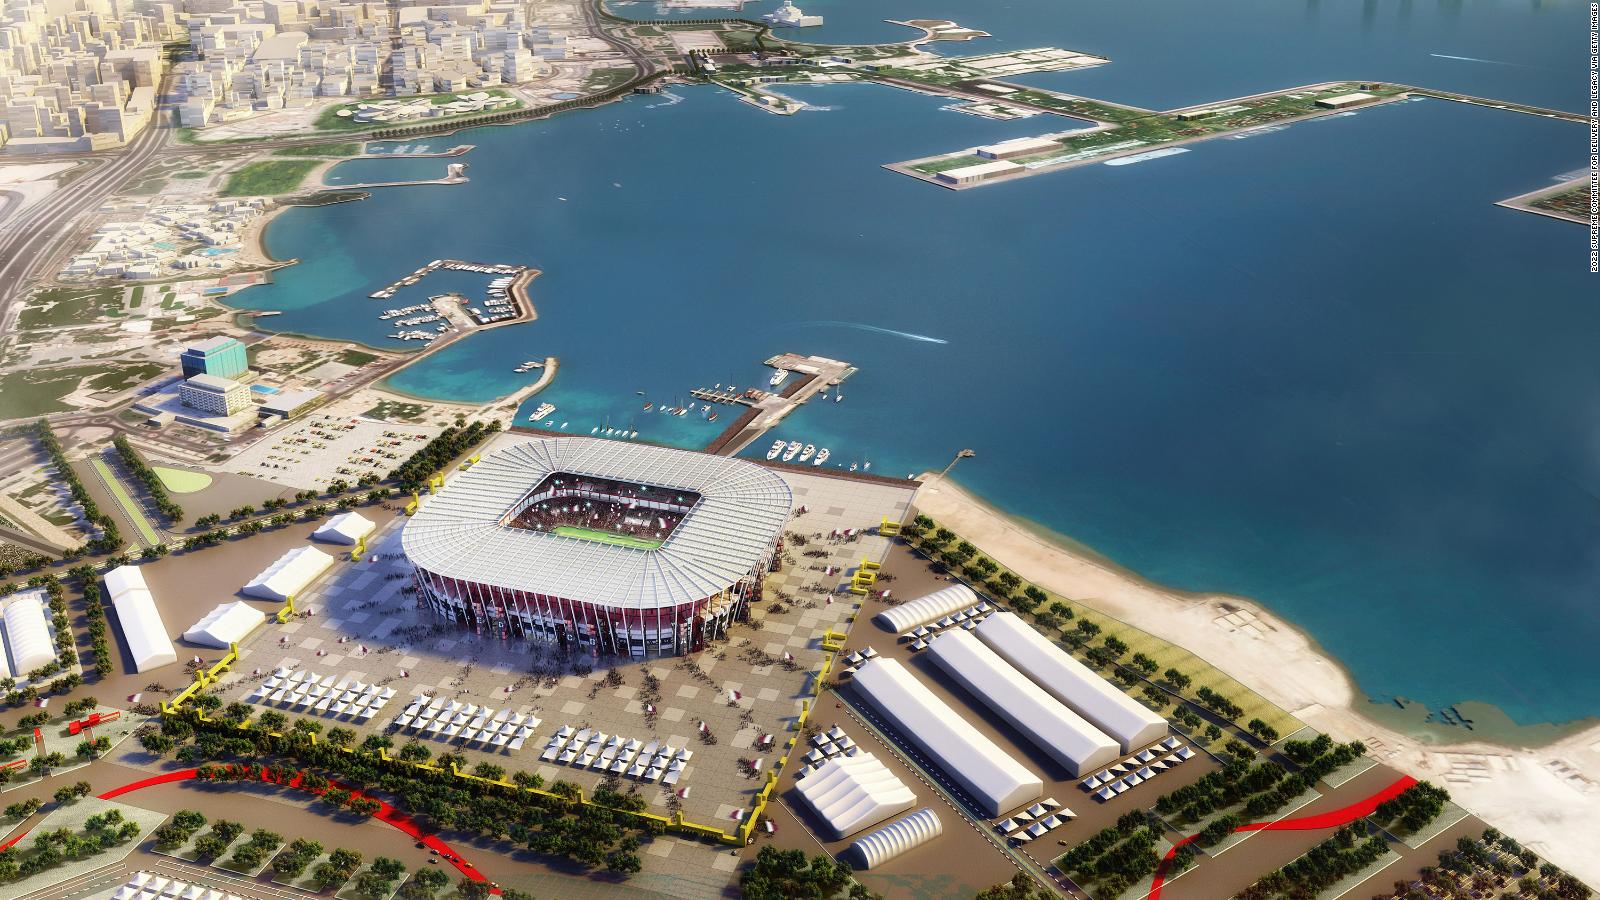 Qatar's Ras Abu Aboud stadium is the first built in World Cup history